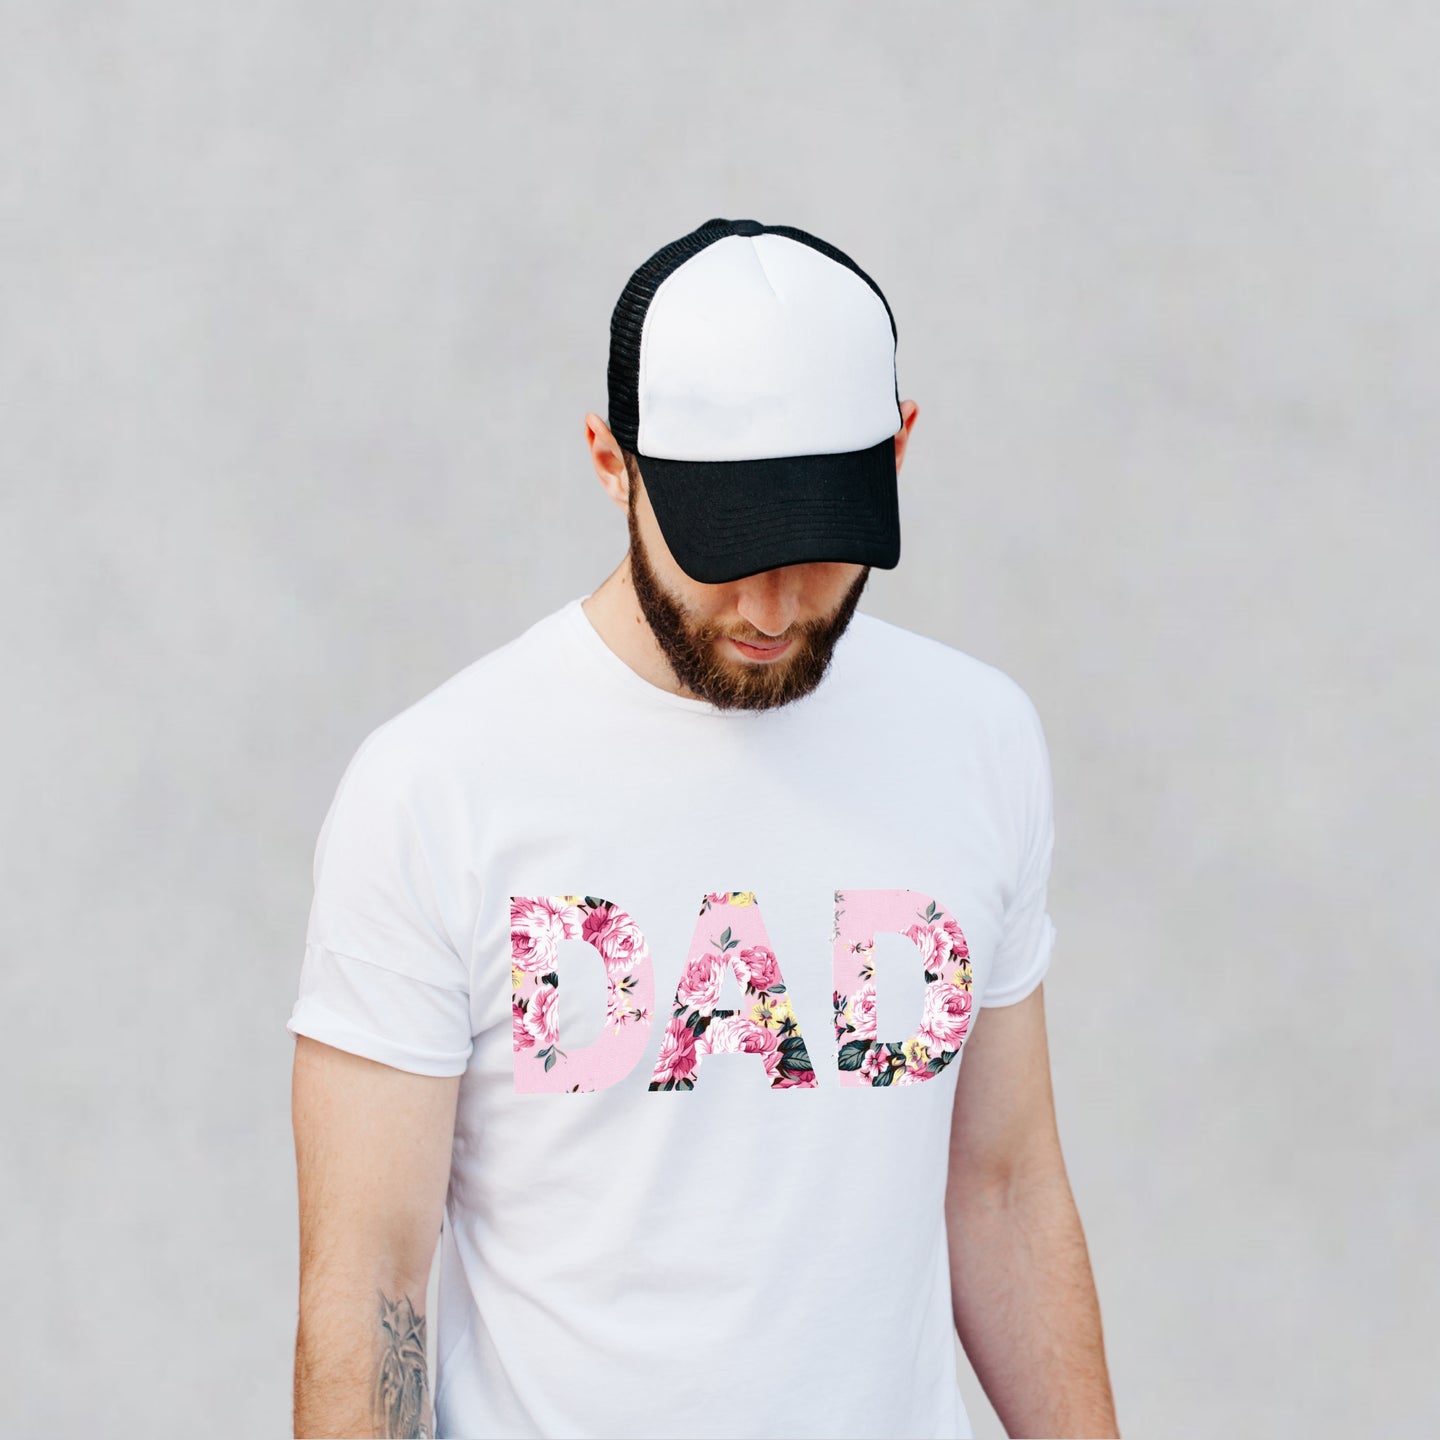 PINK FLORAL MATCHING DAD T-SHIRT - mommyandmearabia